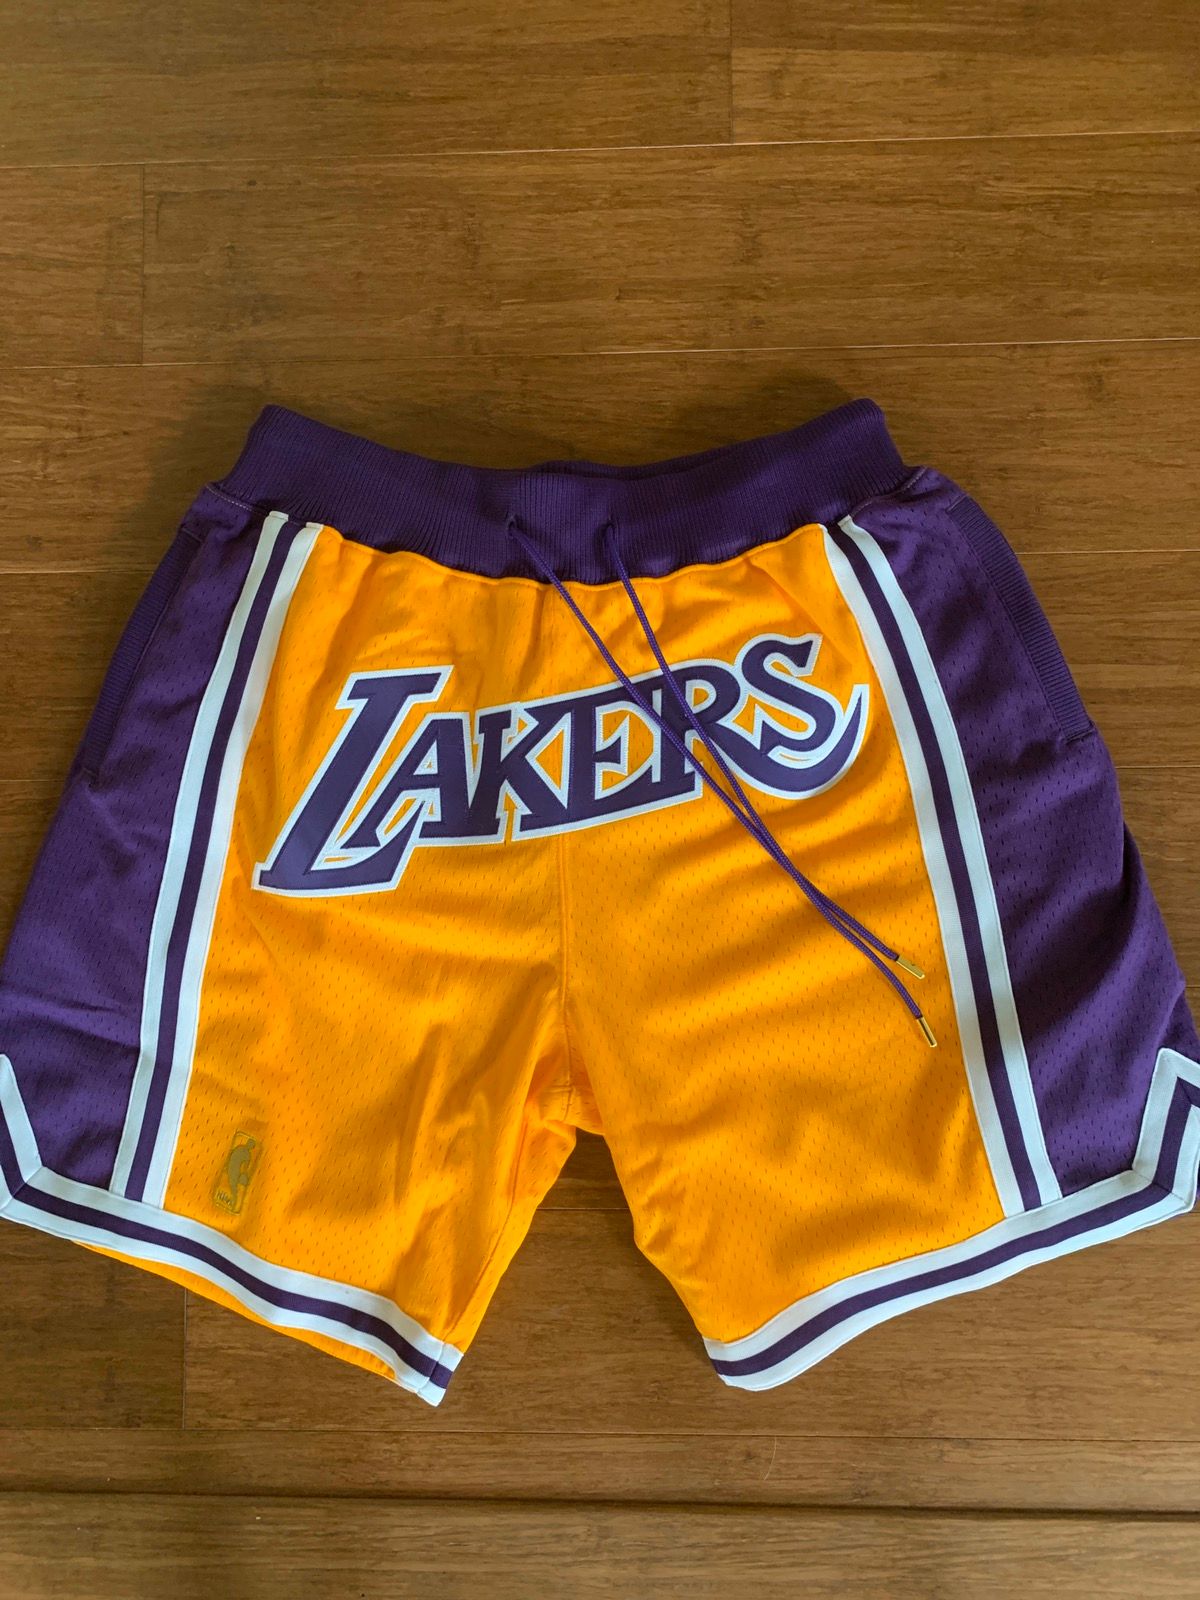 Mitchell & Ness JUST DON LOS ANGELES LAKERS 1996-97 HOME SHORTS Size US 34 / EU 50 - 1 Preview